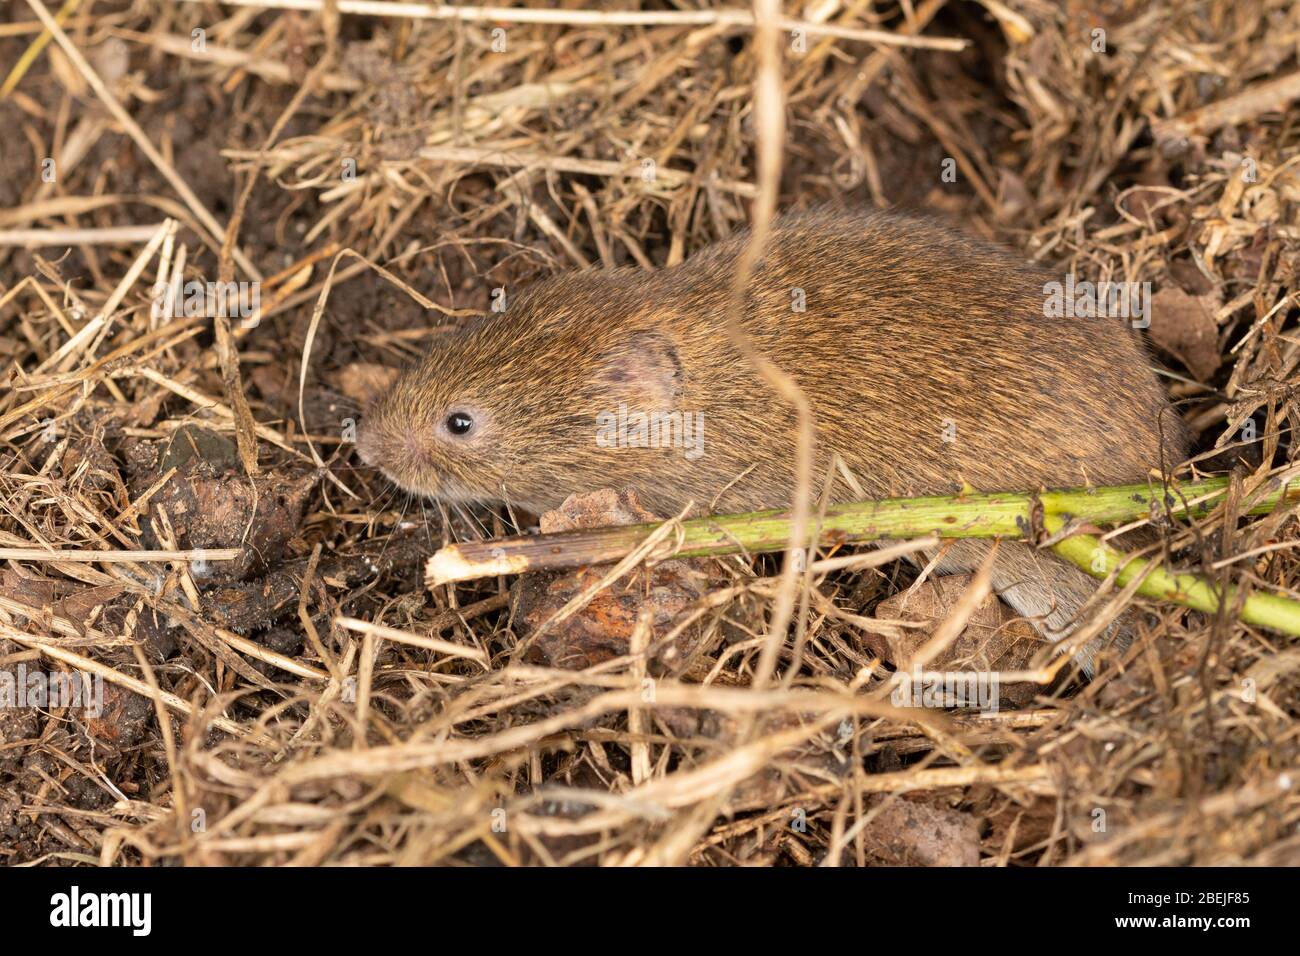 Field vole (Microtus agrestis) also called short-tailed vole, small UK mammal Stock Photo